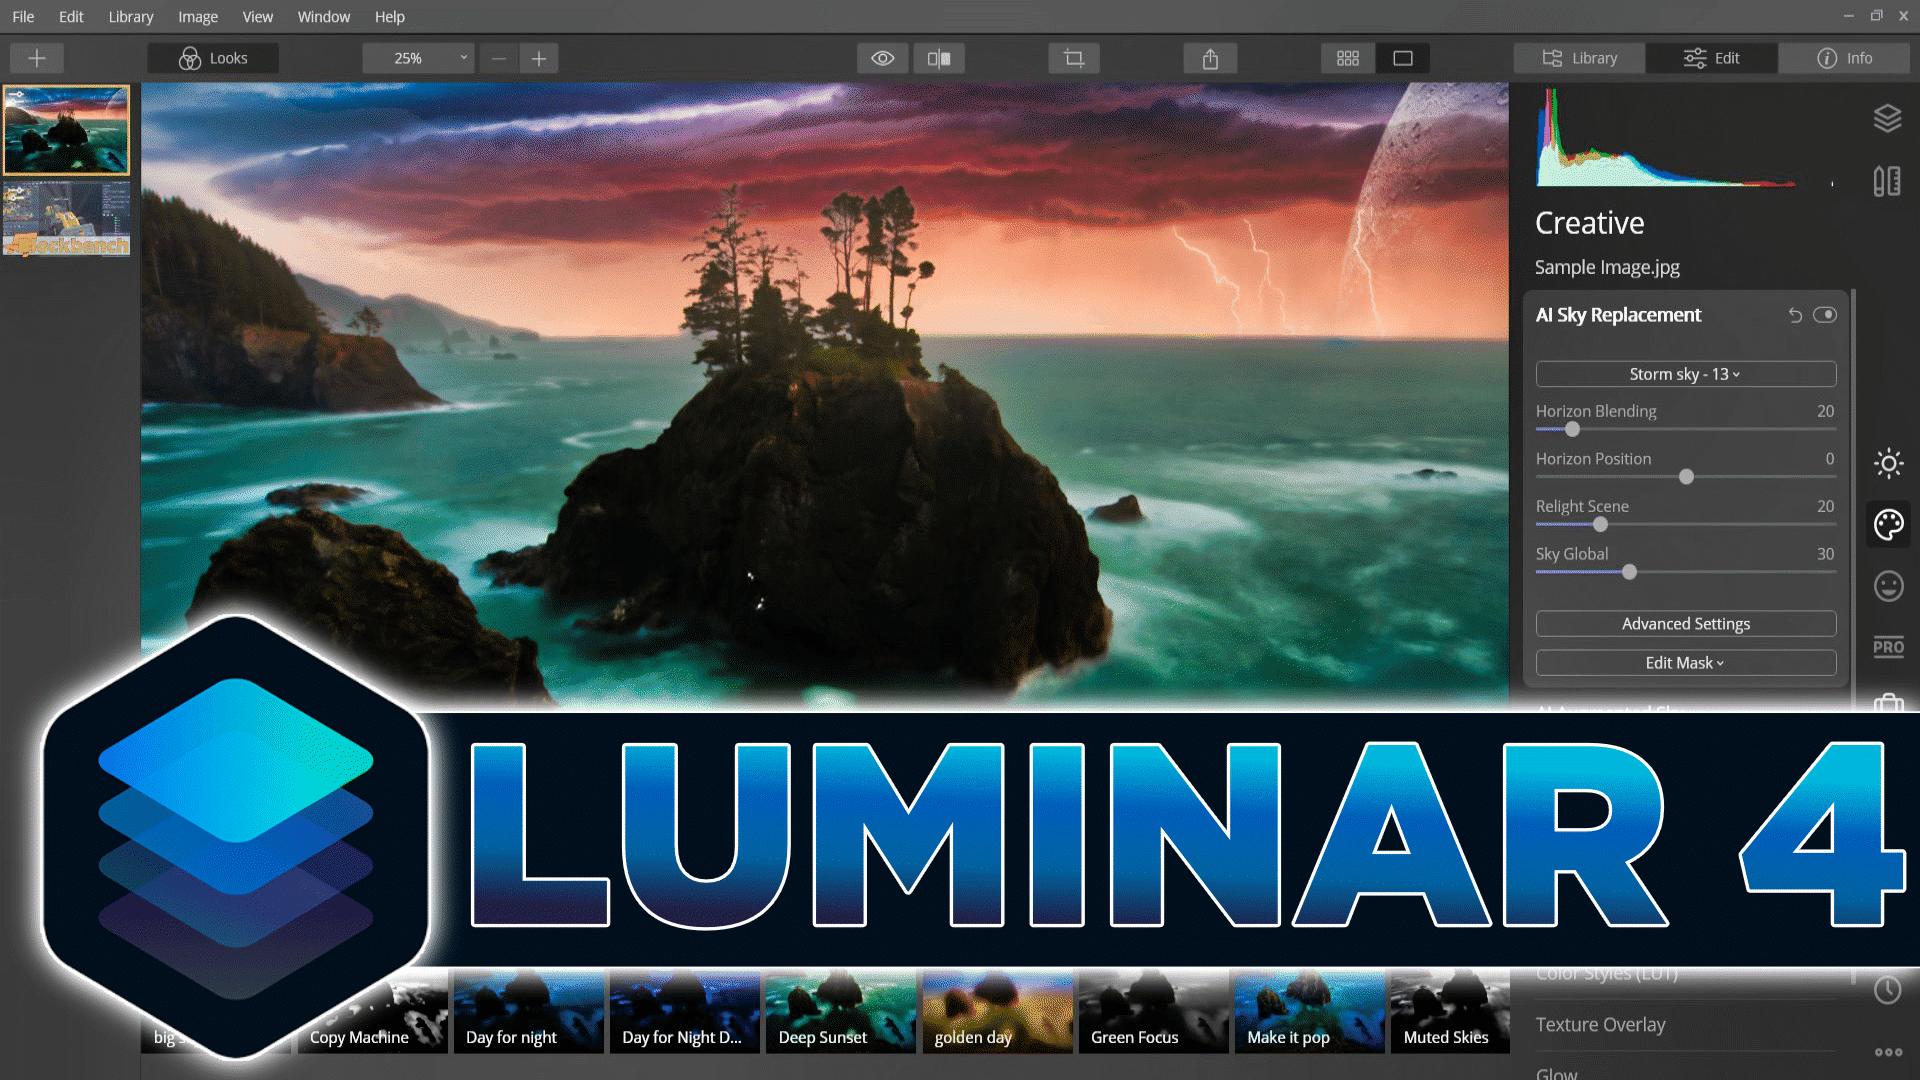 download the last version for ios Luminar Neo 1.11.0.11589